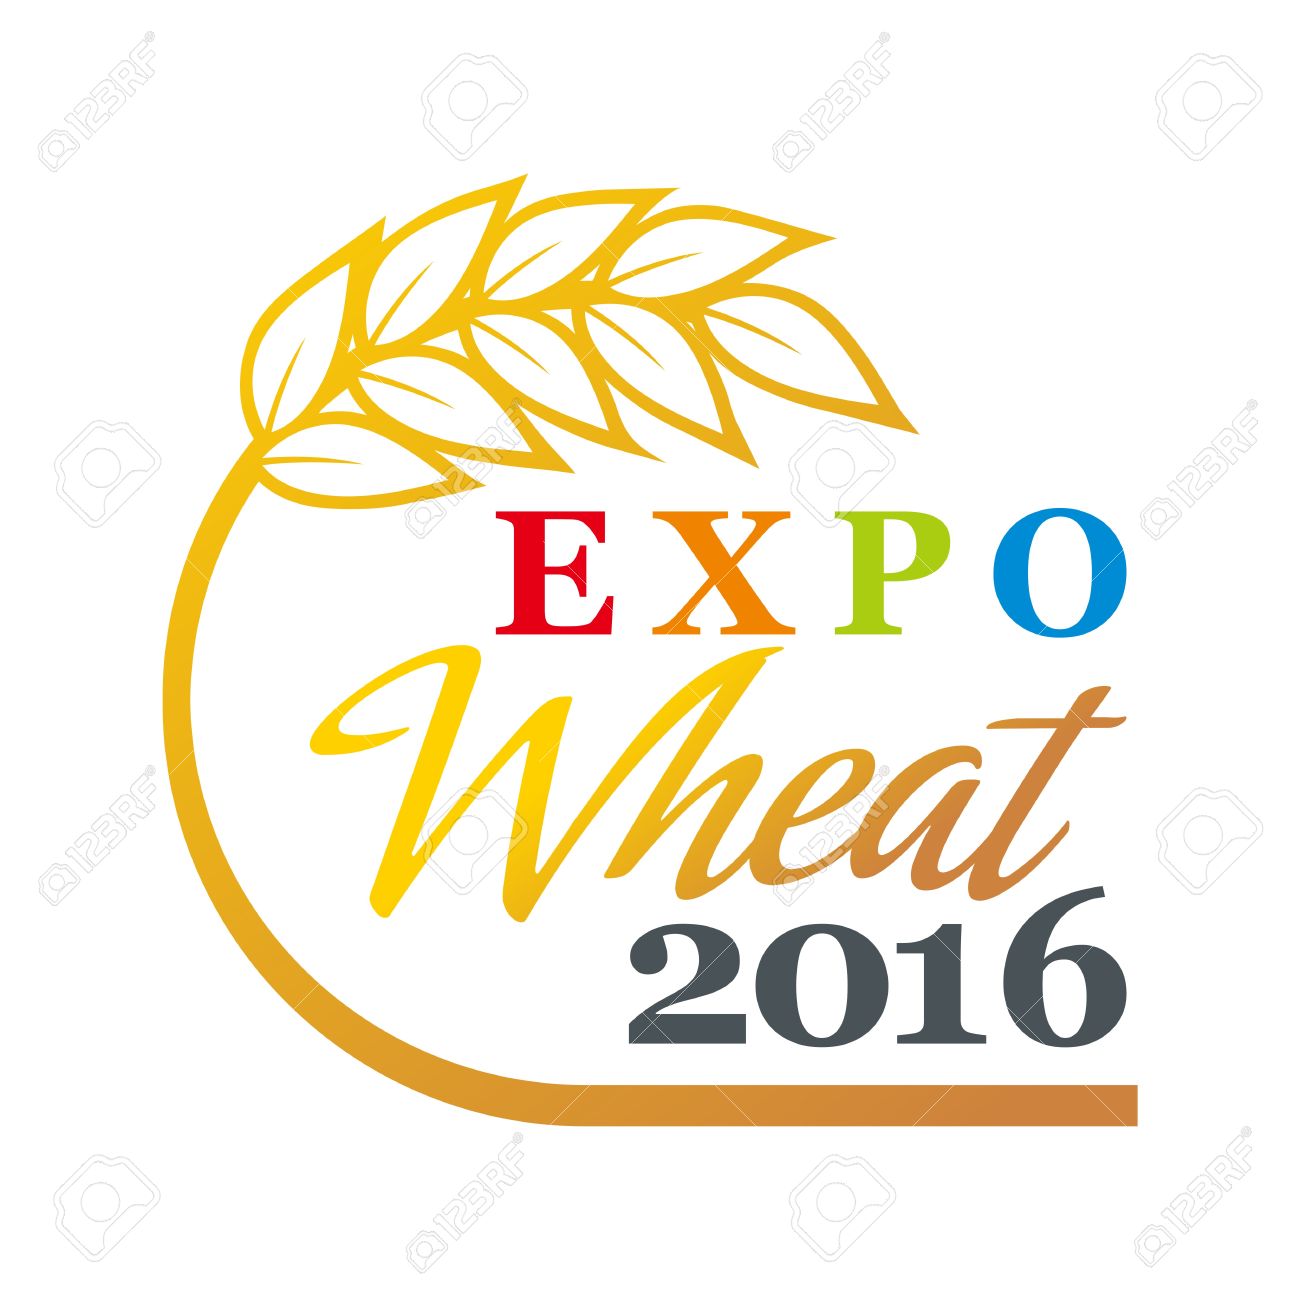 Wheat Abstract Market Plant Product Design Royalty Free Cliparts.